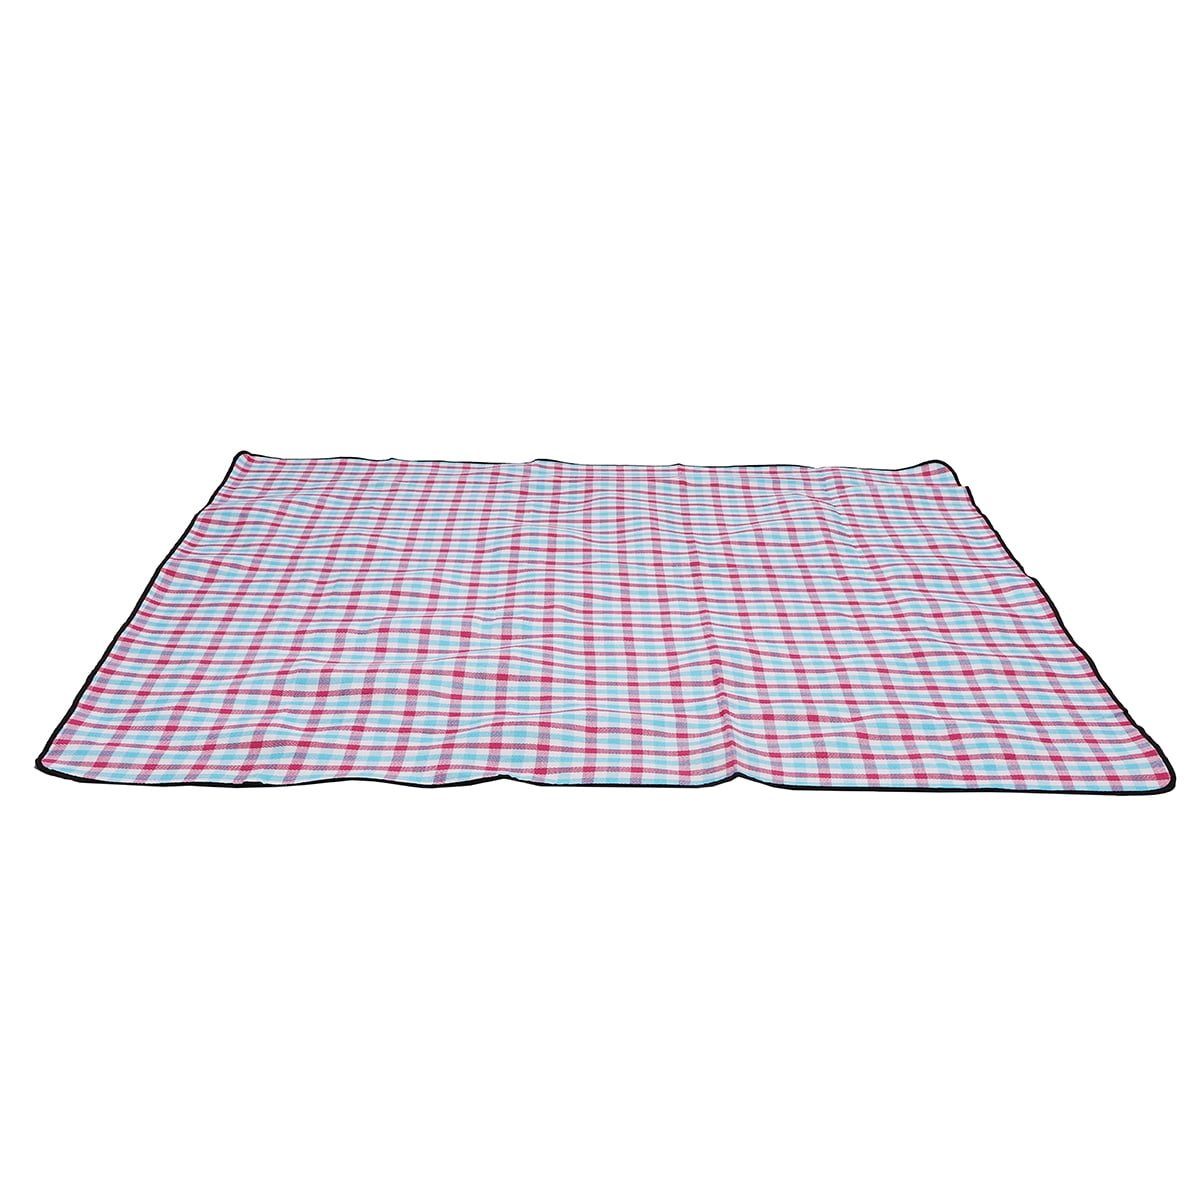 79''x 79'' Extra Large Picnic Blanket,Oversized Outdoor Blanket, Checkered  Picnic Mat Great for The Beach, Camping on Grass Waterproof and SandProof